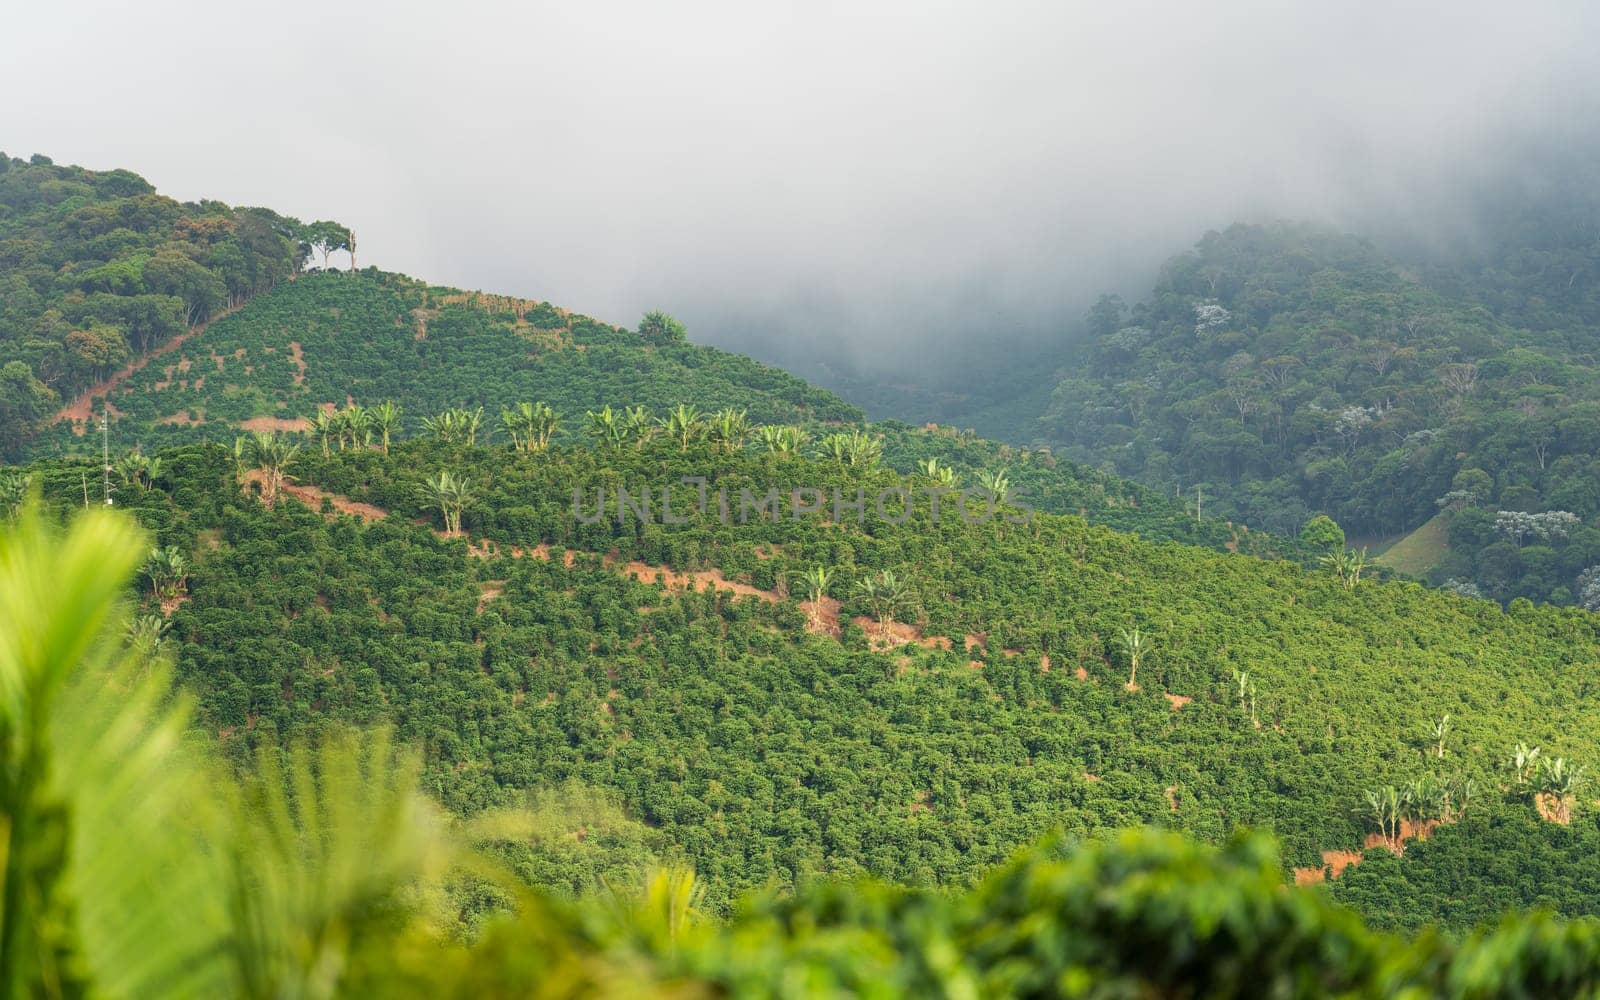 Rows of coffee plantations covered by heavy mist, nestled in the mountain, an ideal destiny for coffee lovers.